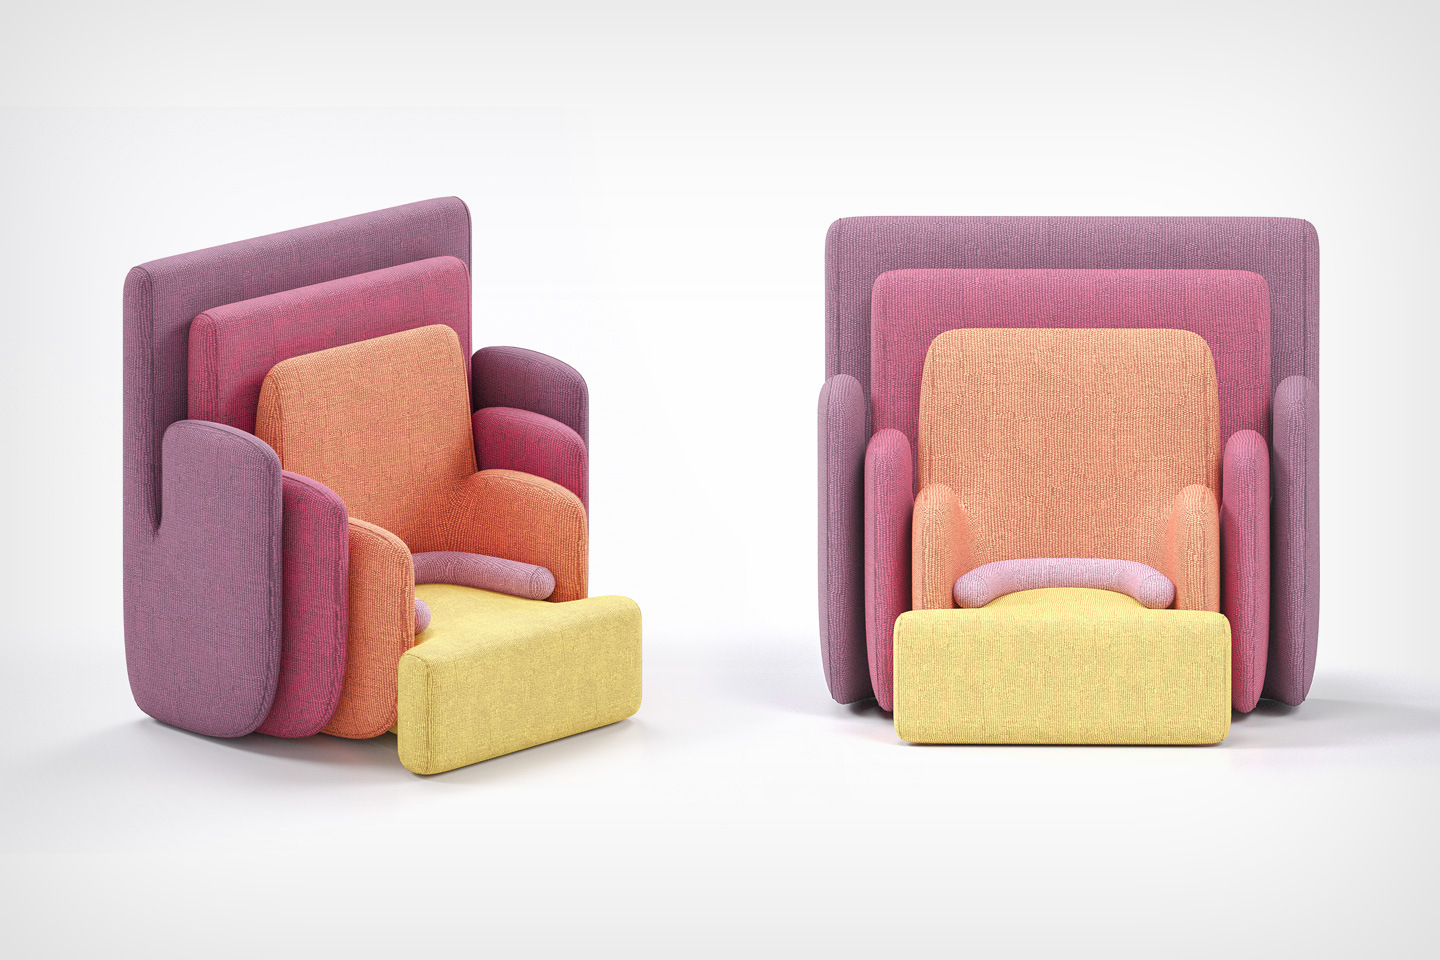 #Chairs designed to be the culmination of ergonomics, style and comfort